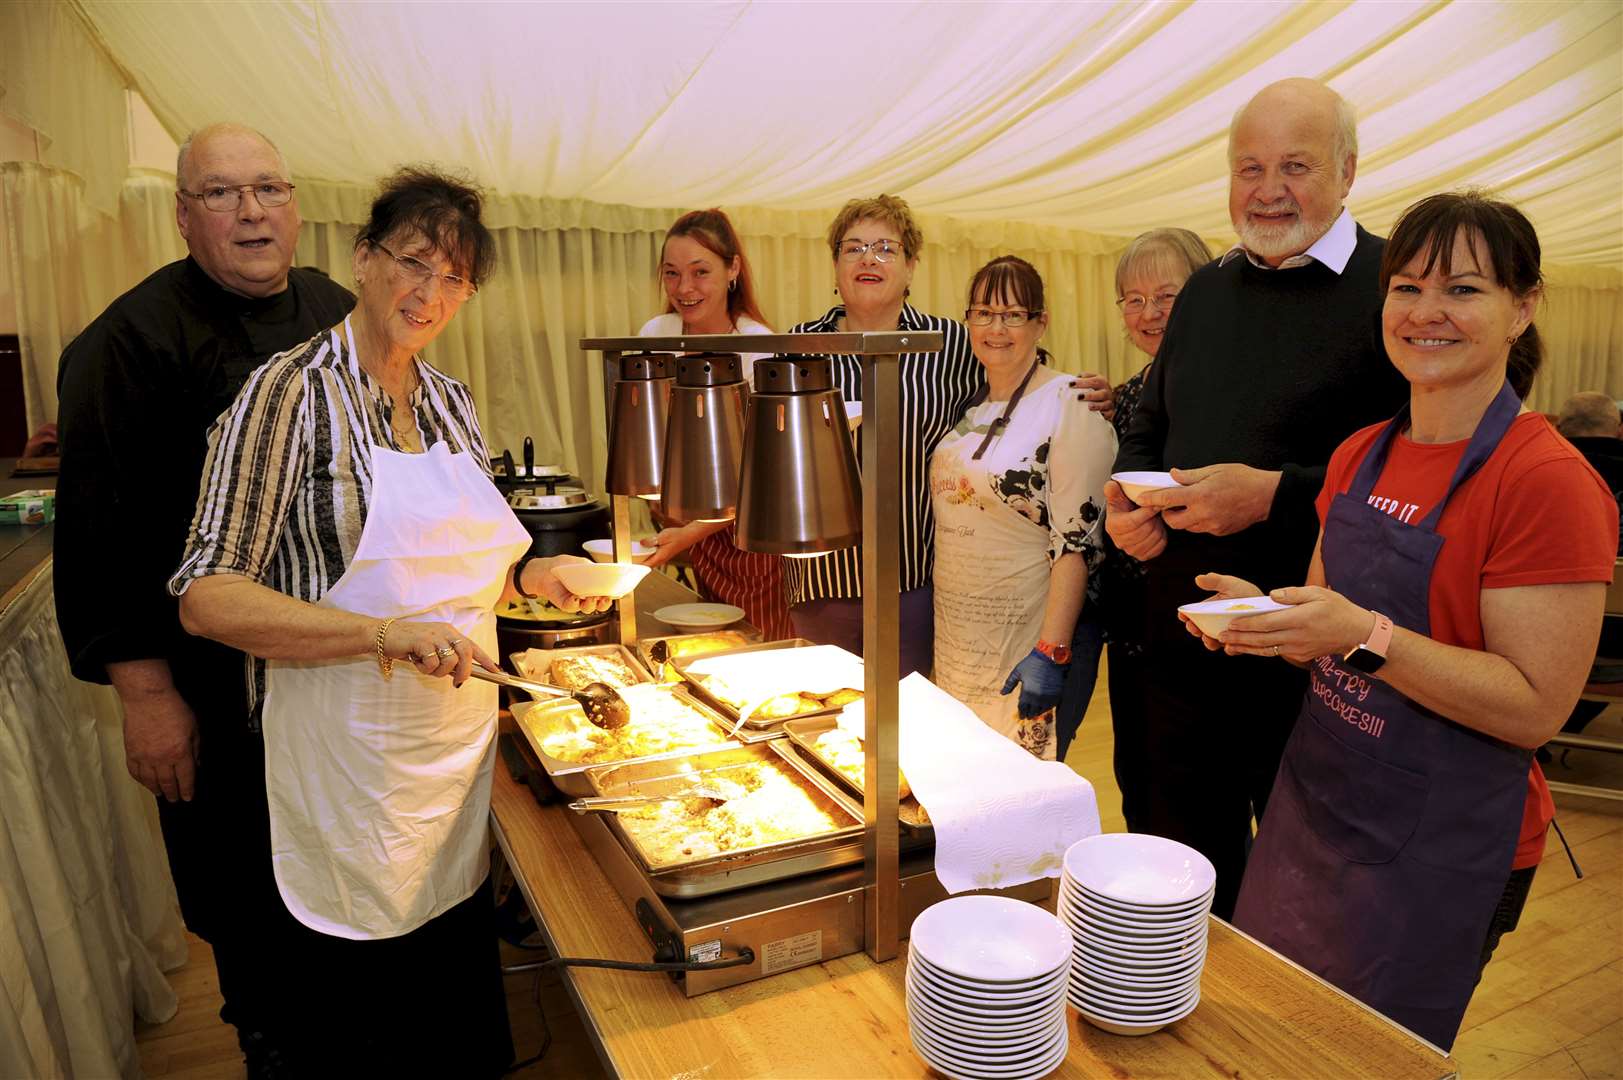 Getting ready to serve up some treats are monitoring group chairman Gordon McDonald (second right), Moray Council community support officer Tracey Rae, chef Jimmy Bremner and other members of the team. Picture: Eric Cormack